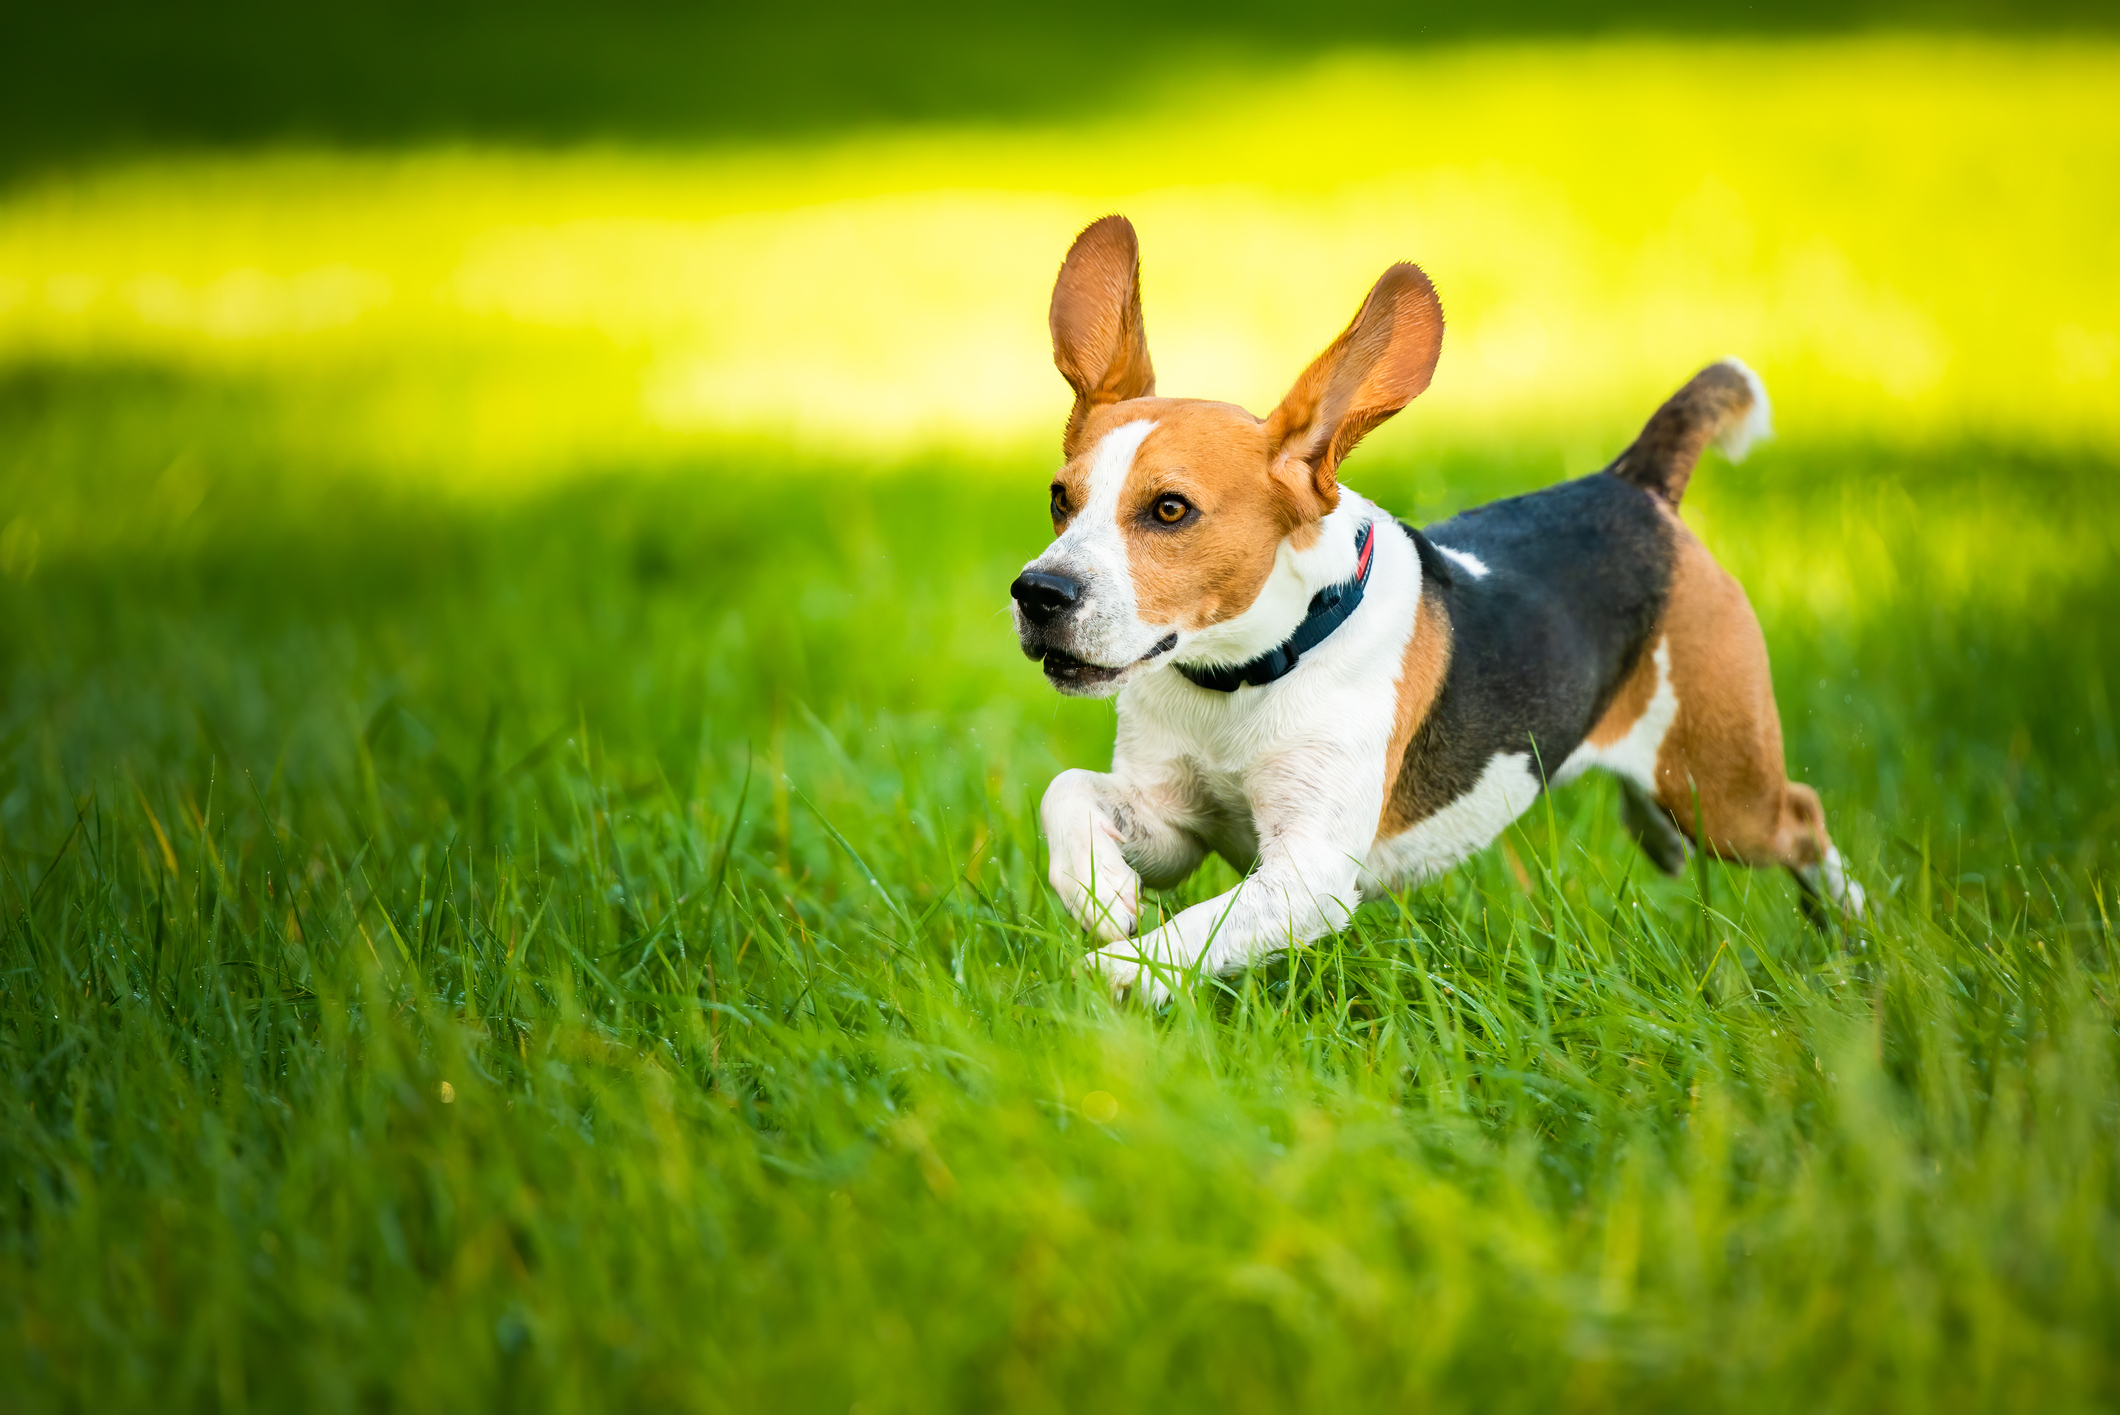 Dog Beagle running fast and jumping with tongue out through green grass field in a spring (Getty)